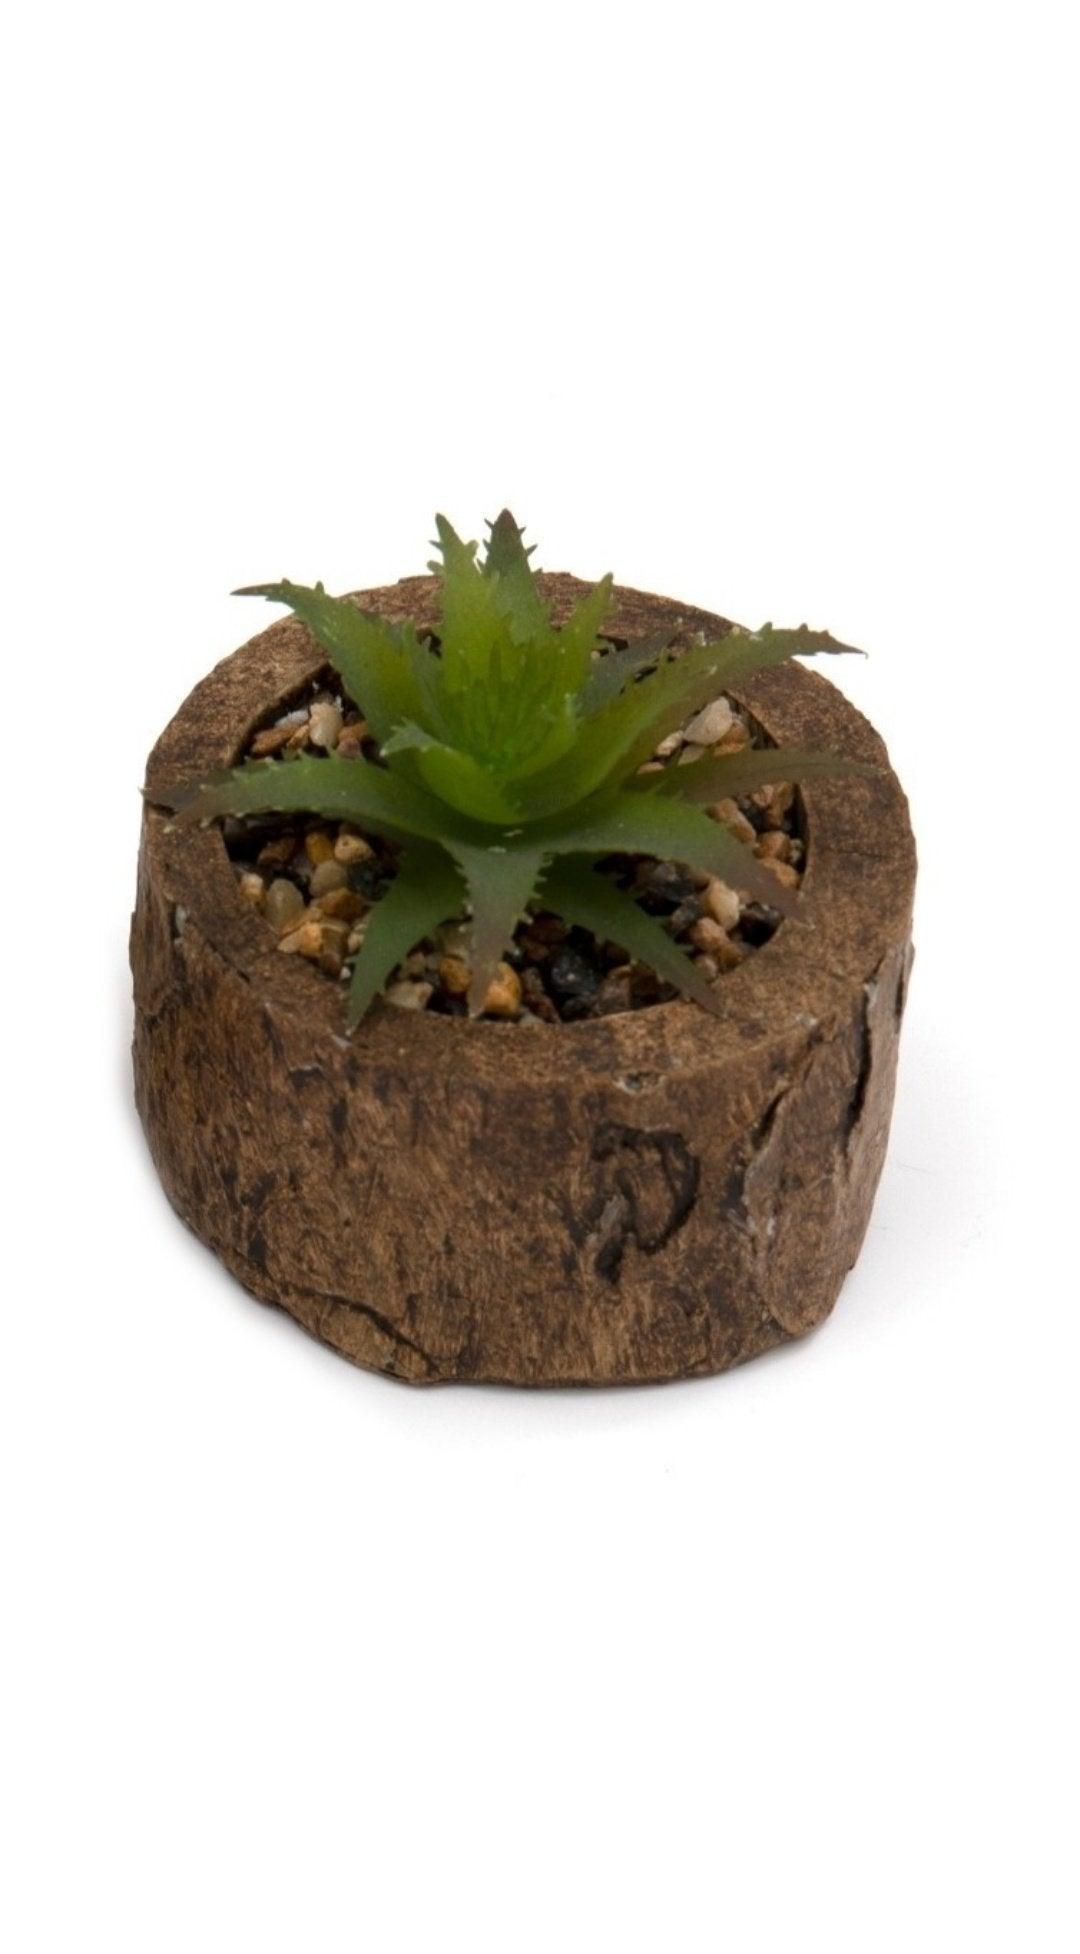 View Bark Effect Pot and Succulent information